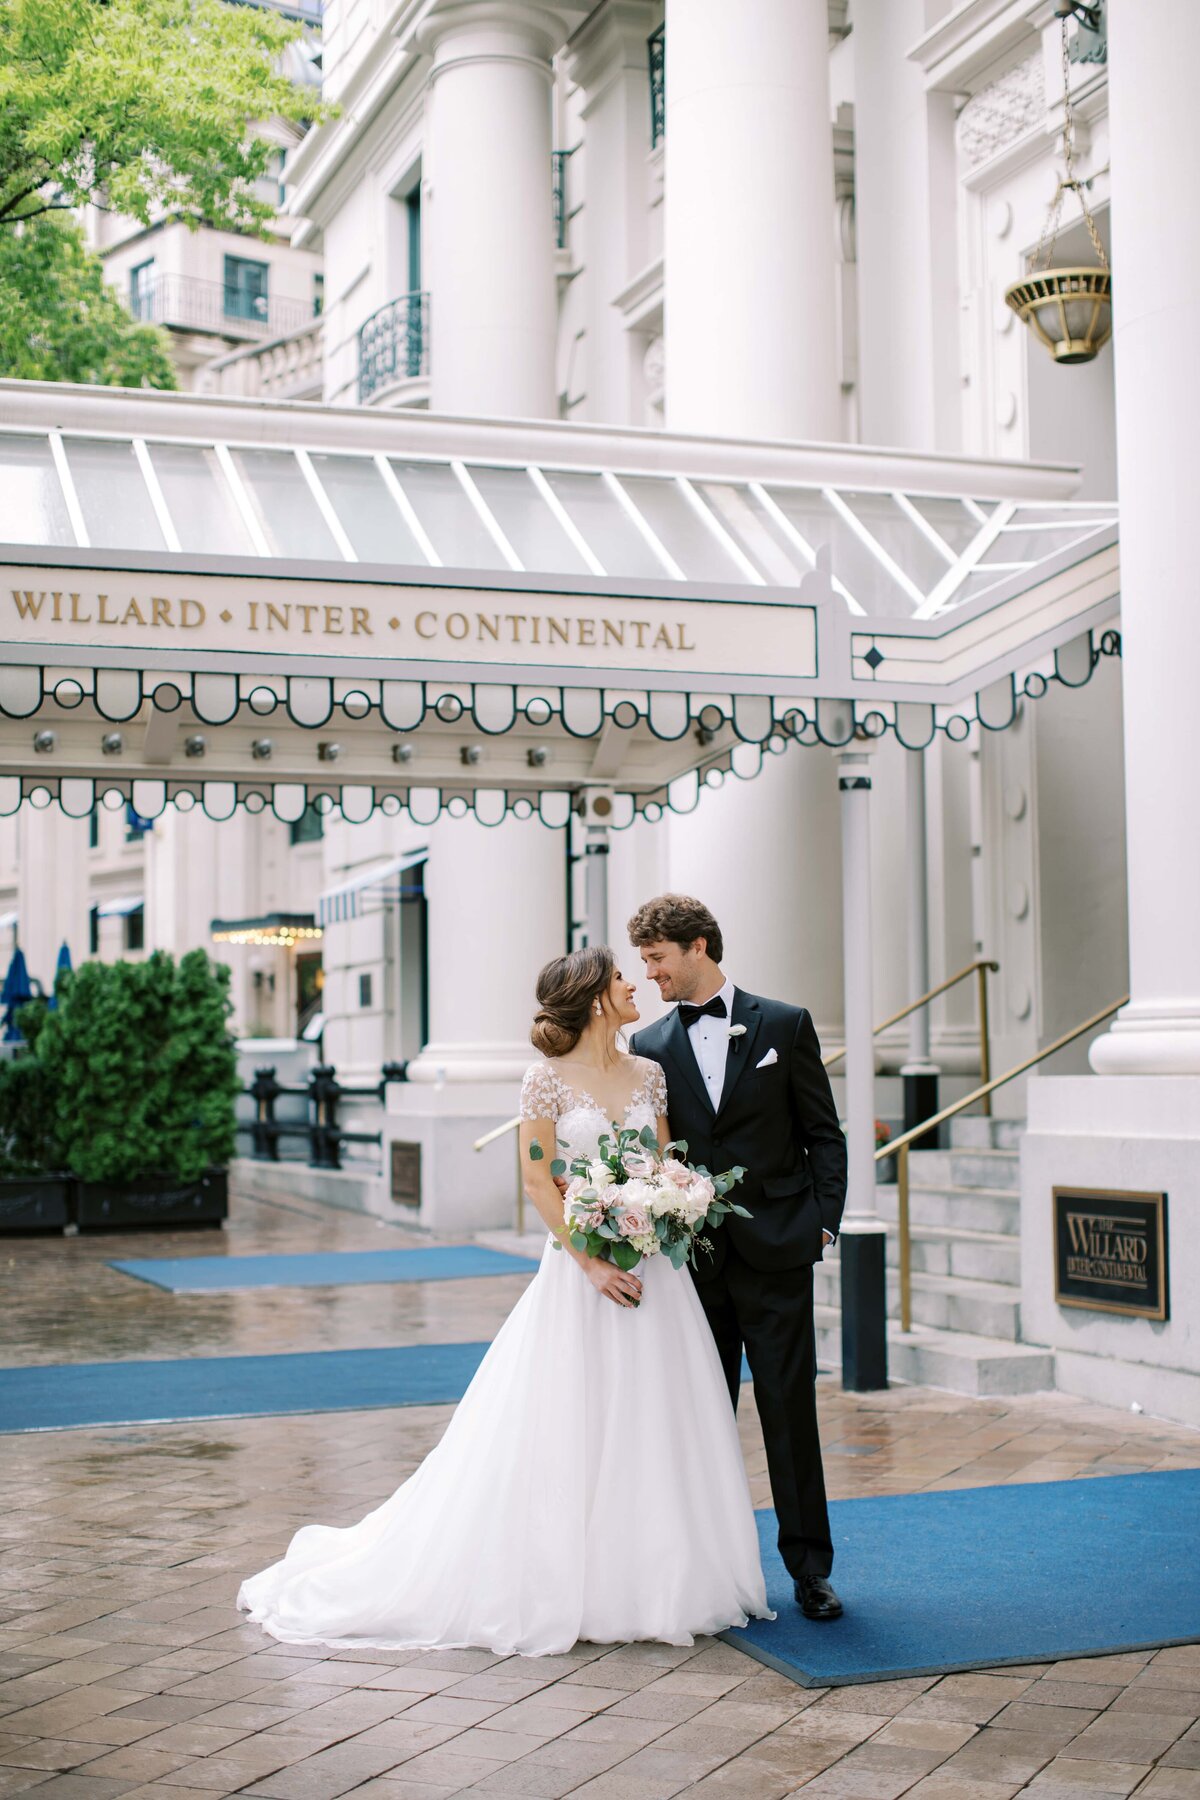 Young newlywed couple in wedding attire smiling at each other while standing side by side in front of The Willard Hotel in Washington DC